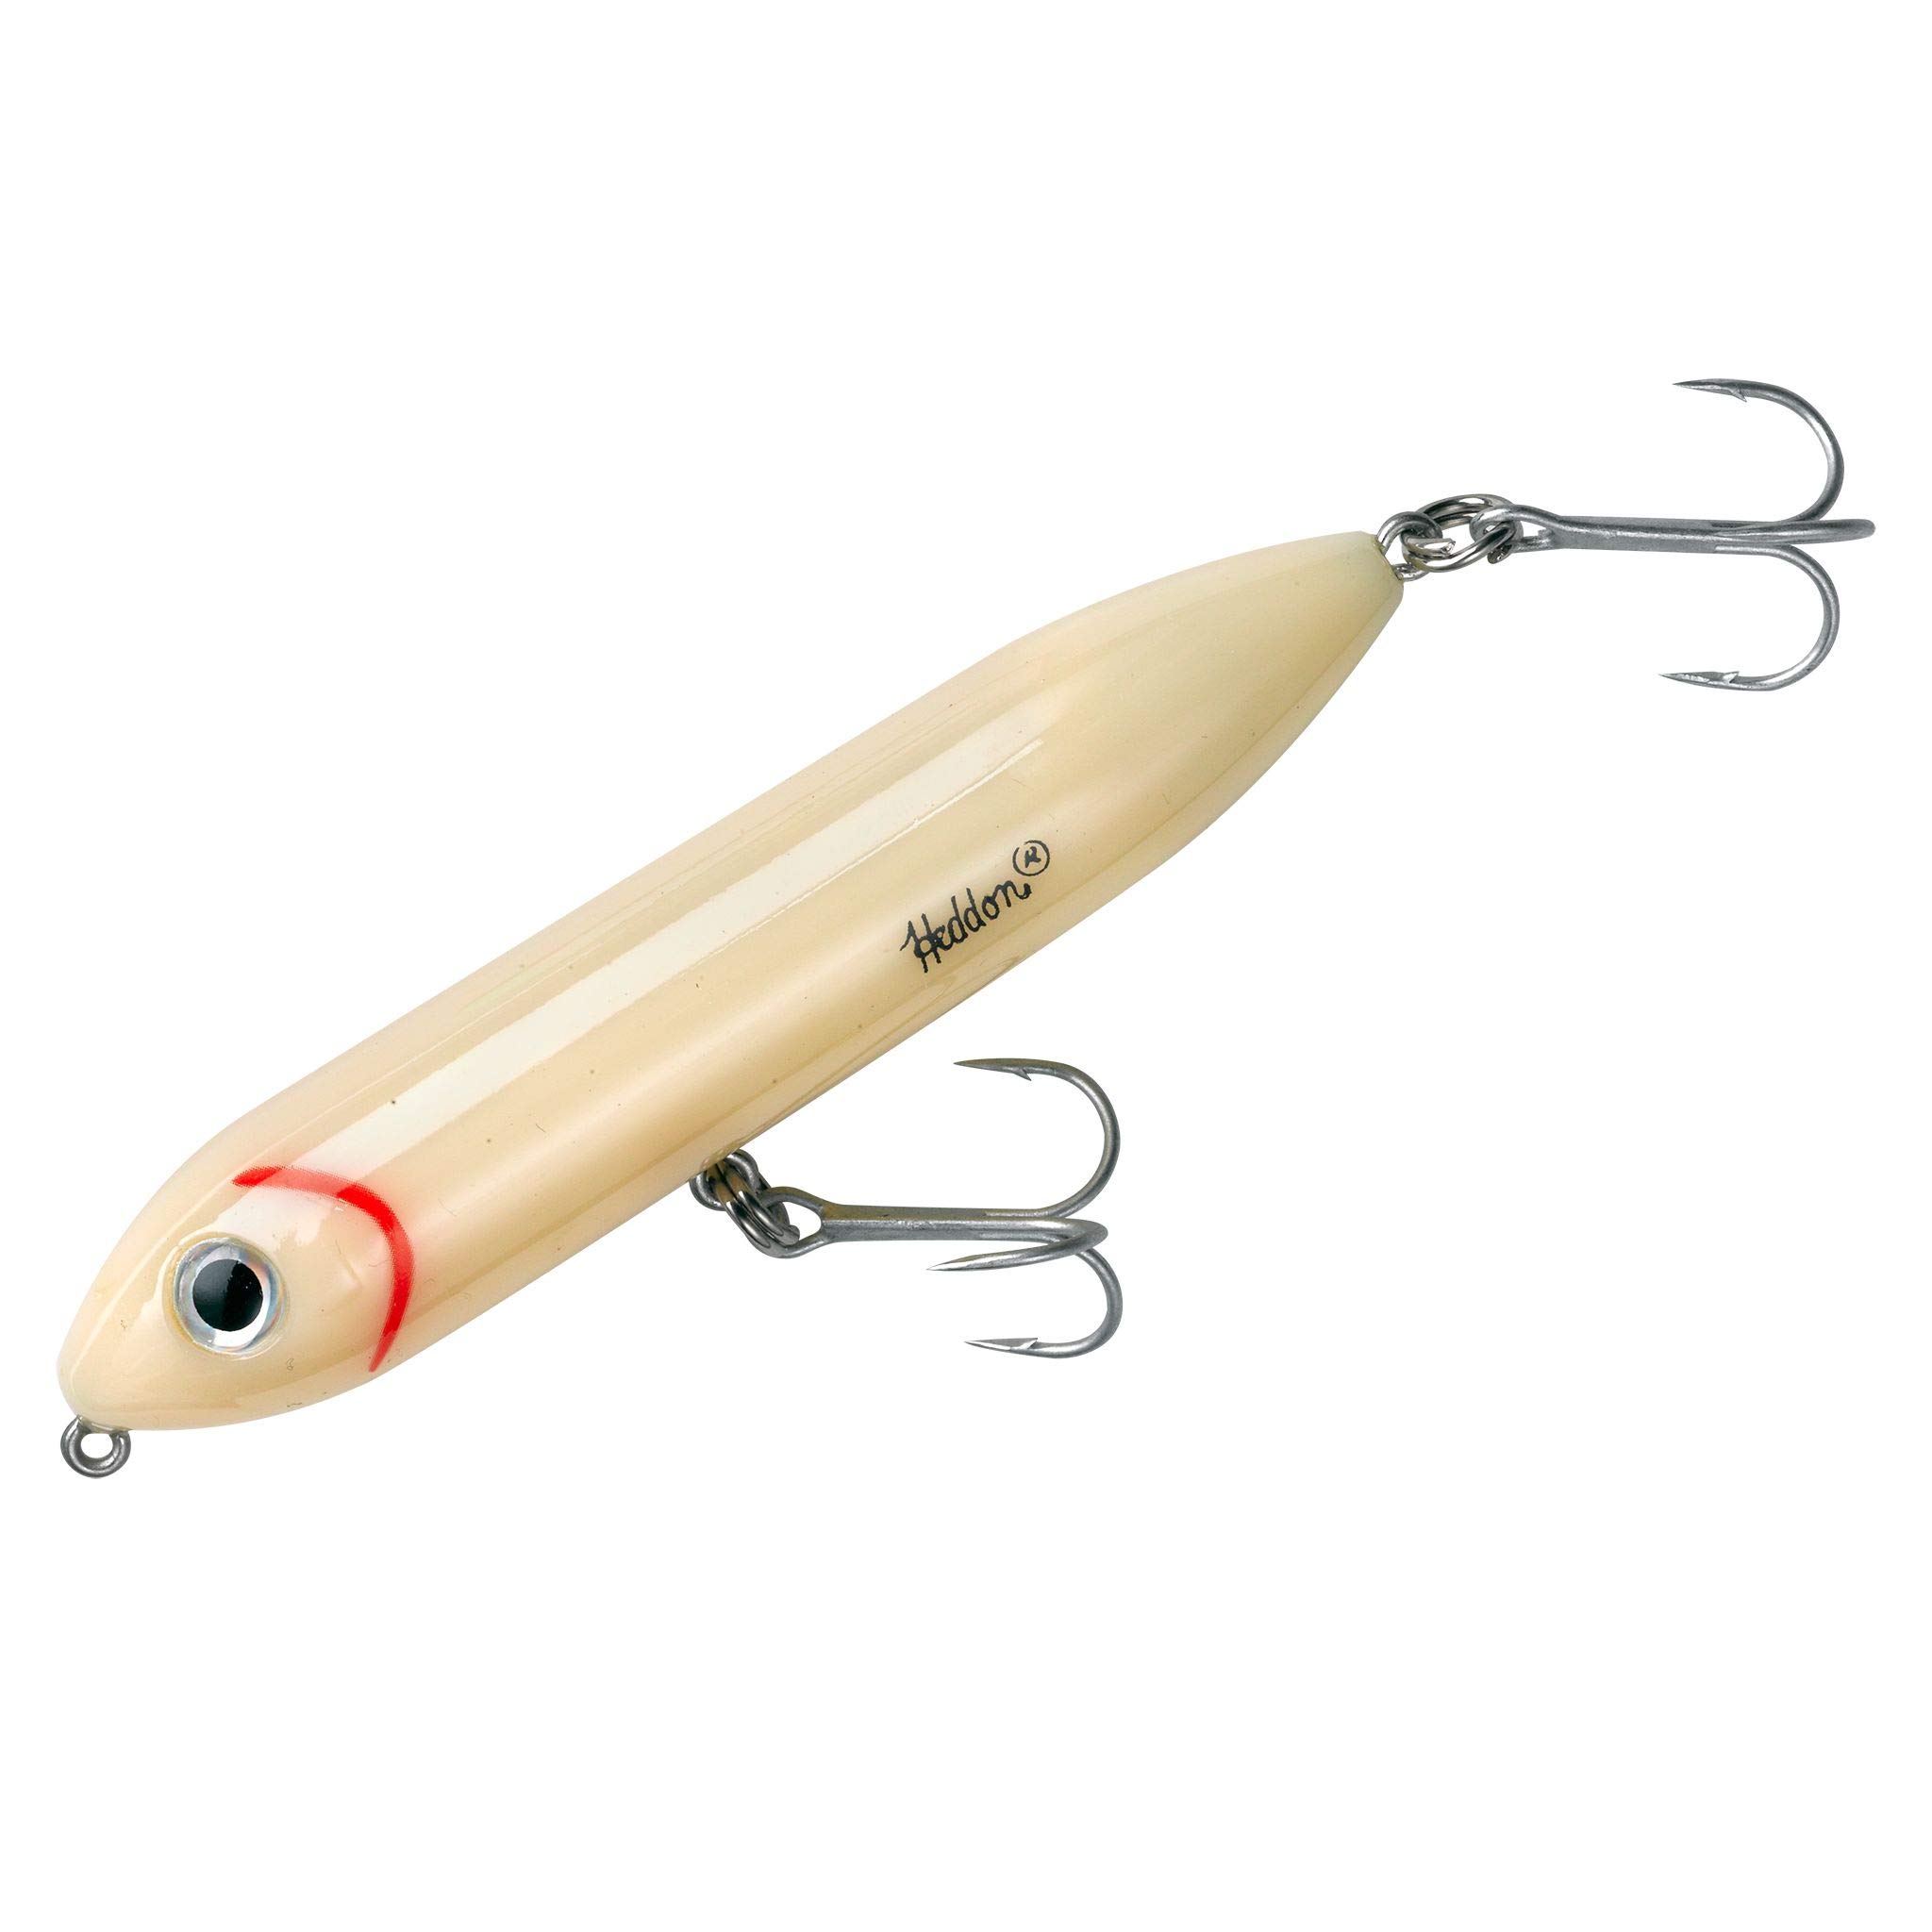 Heddon Super Spook Topwater Fishing Lure for Saltwater and